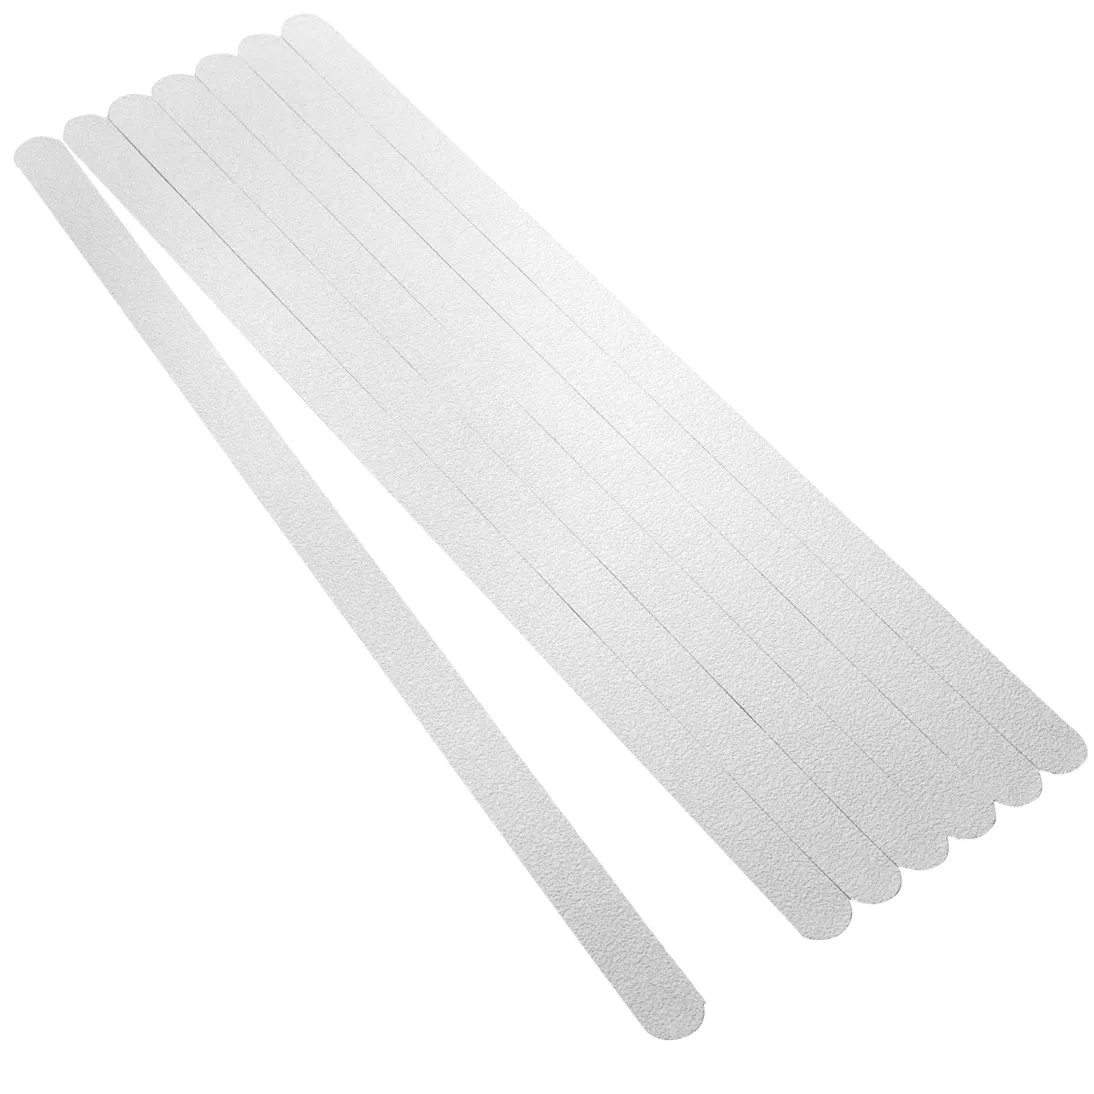 3M™ Safety-Walk™ Slip-Resistant Fine Resilient Tapes and Treads 200,
White, 19 mm x 431 mm, 400 Sheets/Case